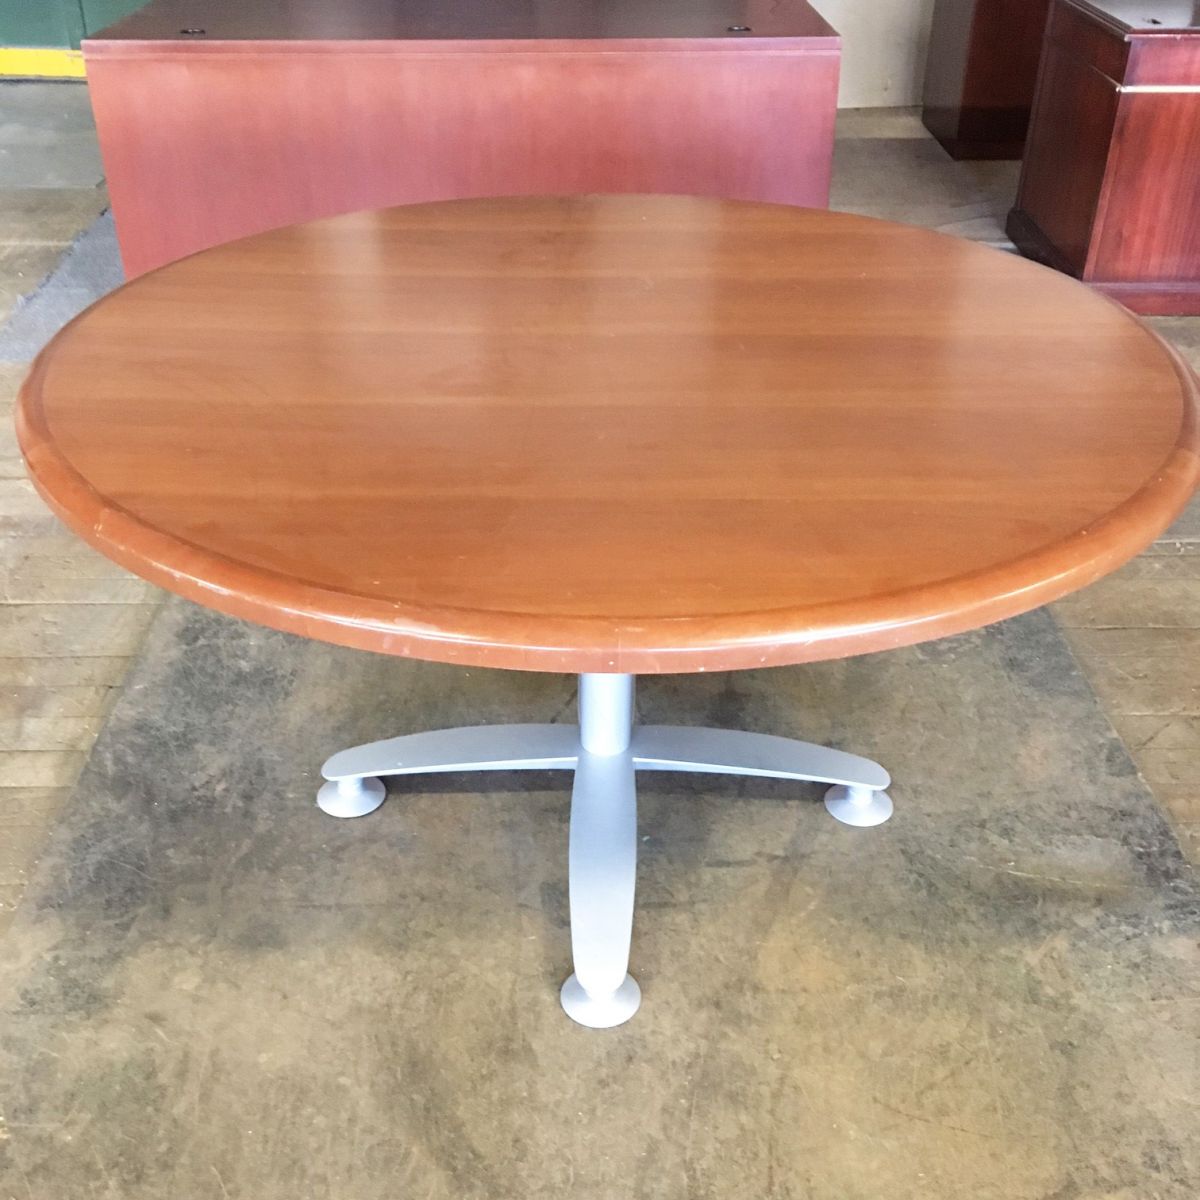 T9603C - 54" Round Wood Veneer Conference Table - Cherry